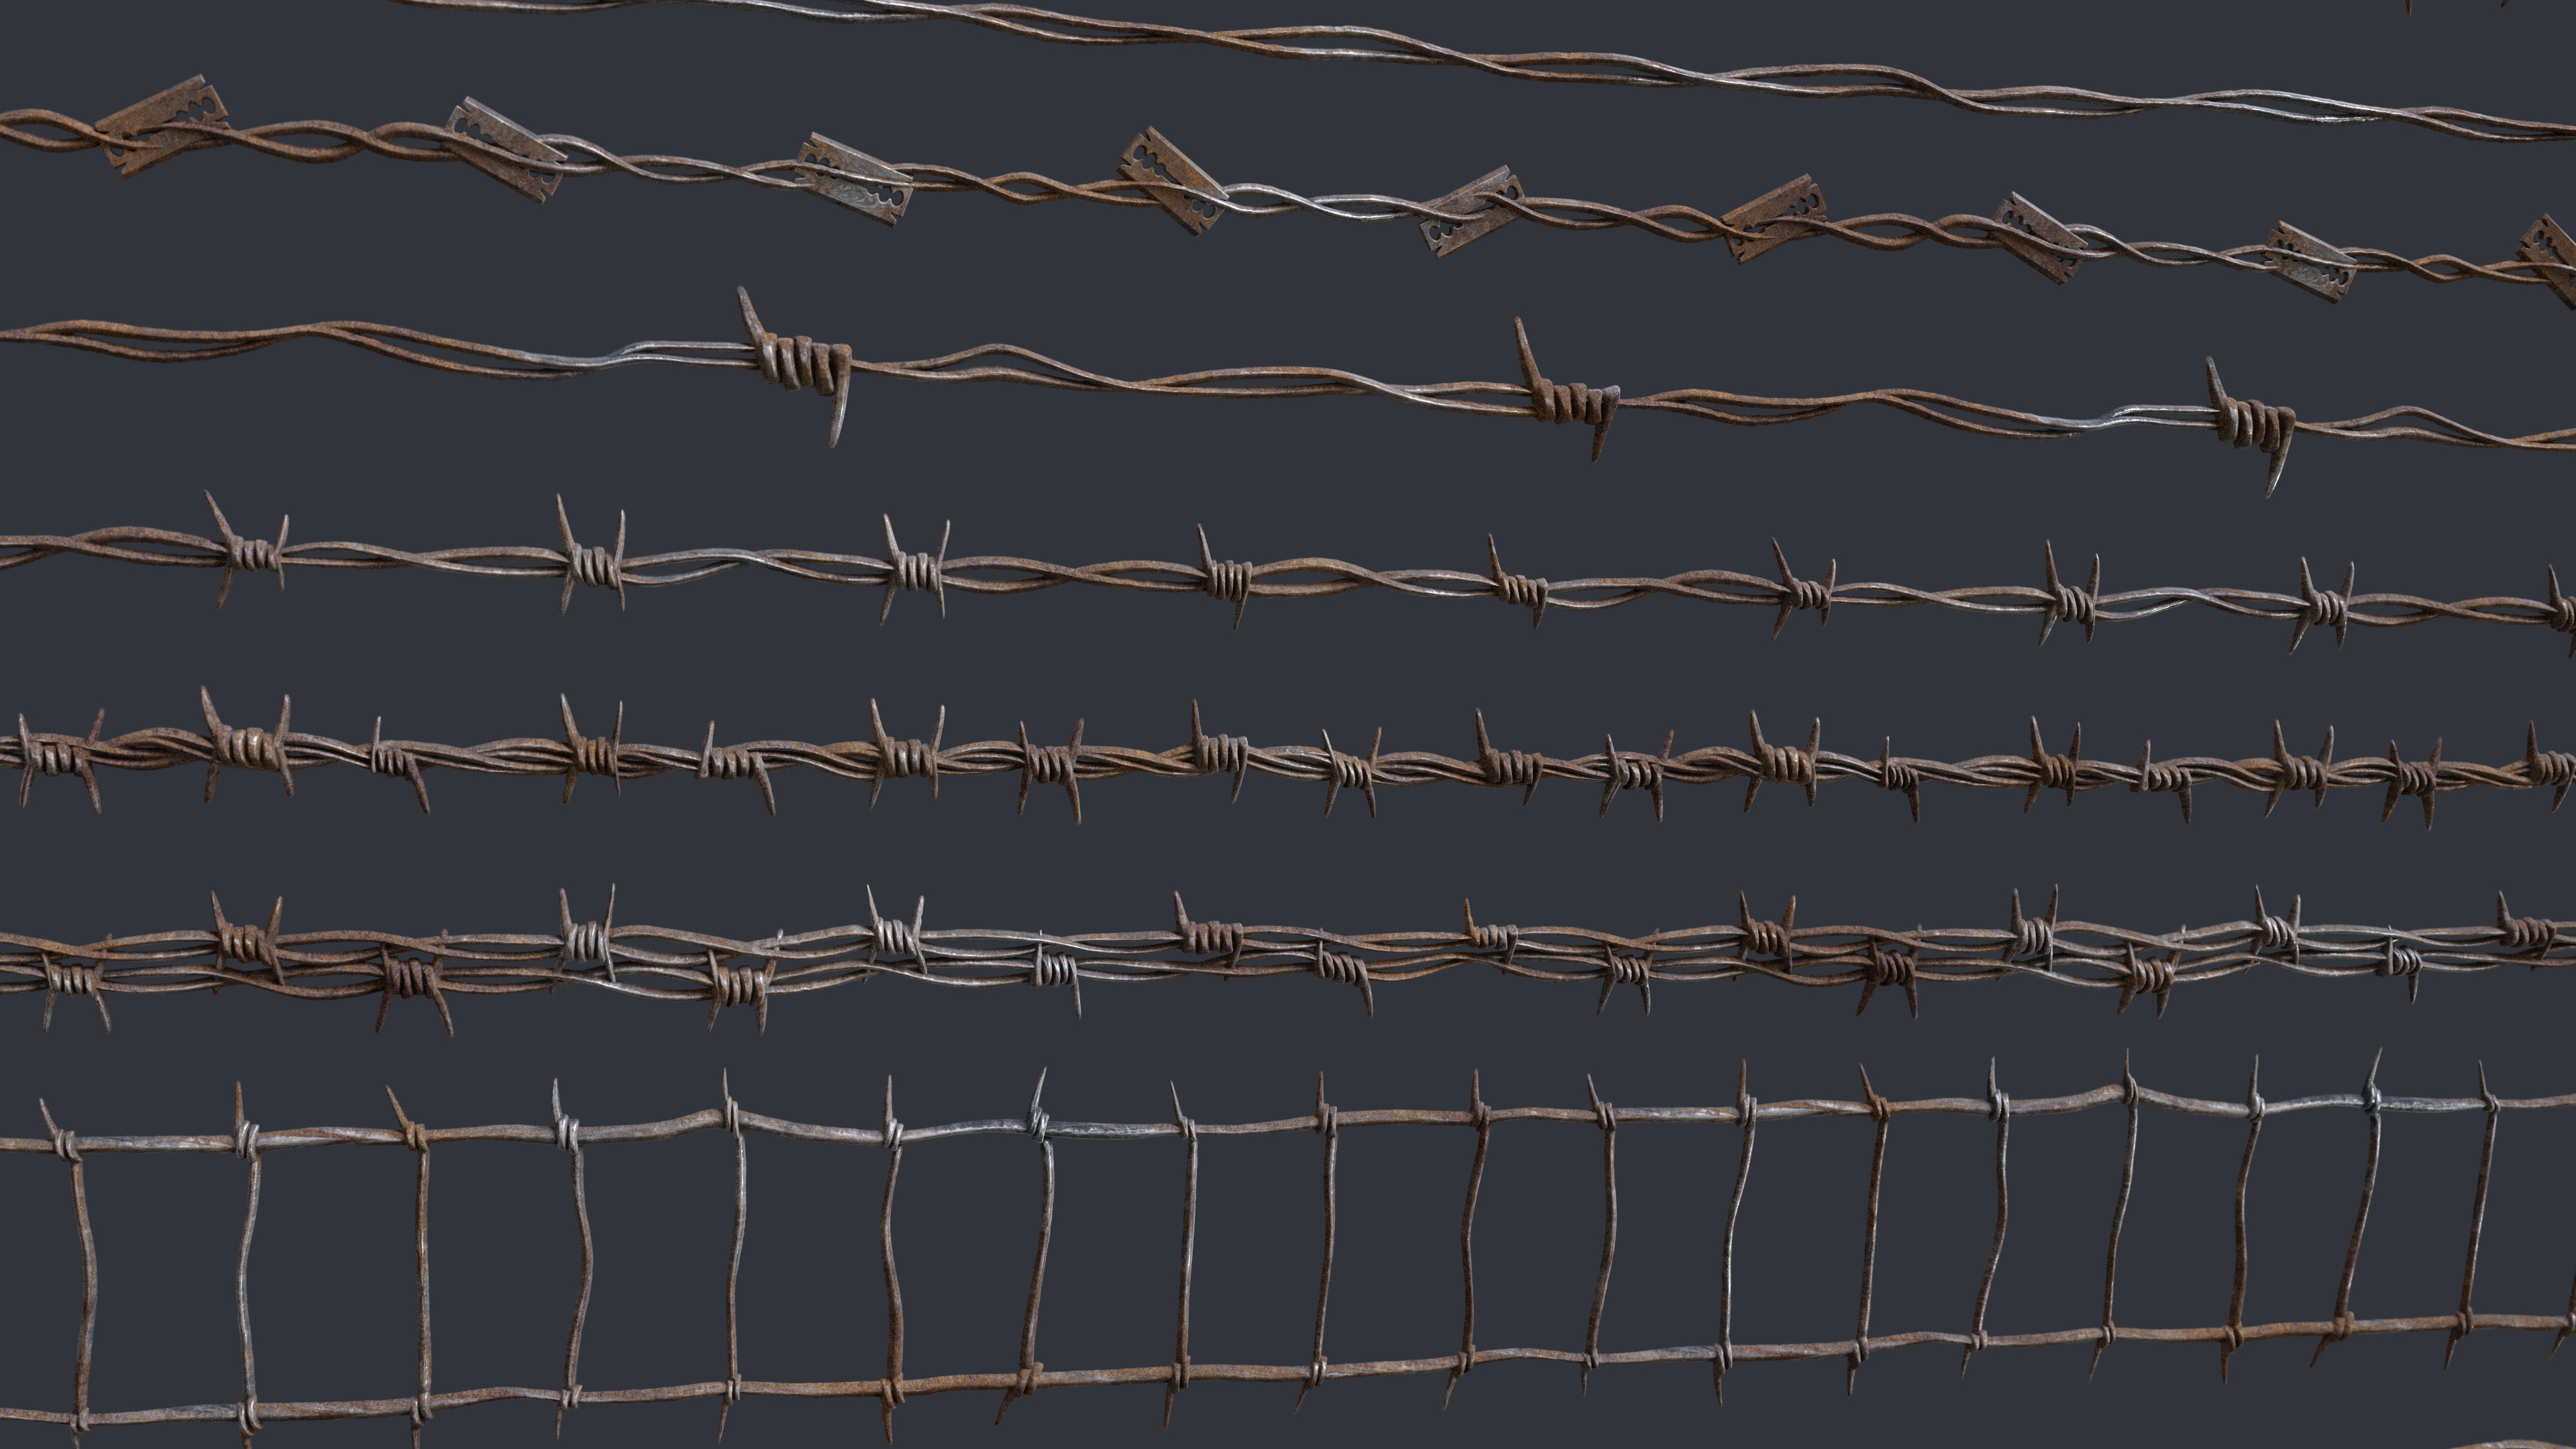 barbed wire fencing materials